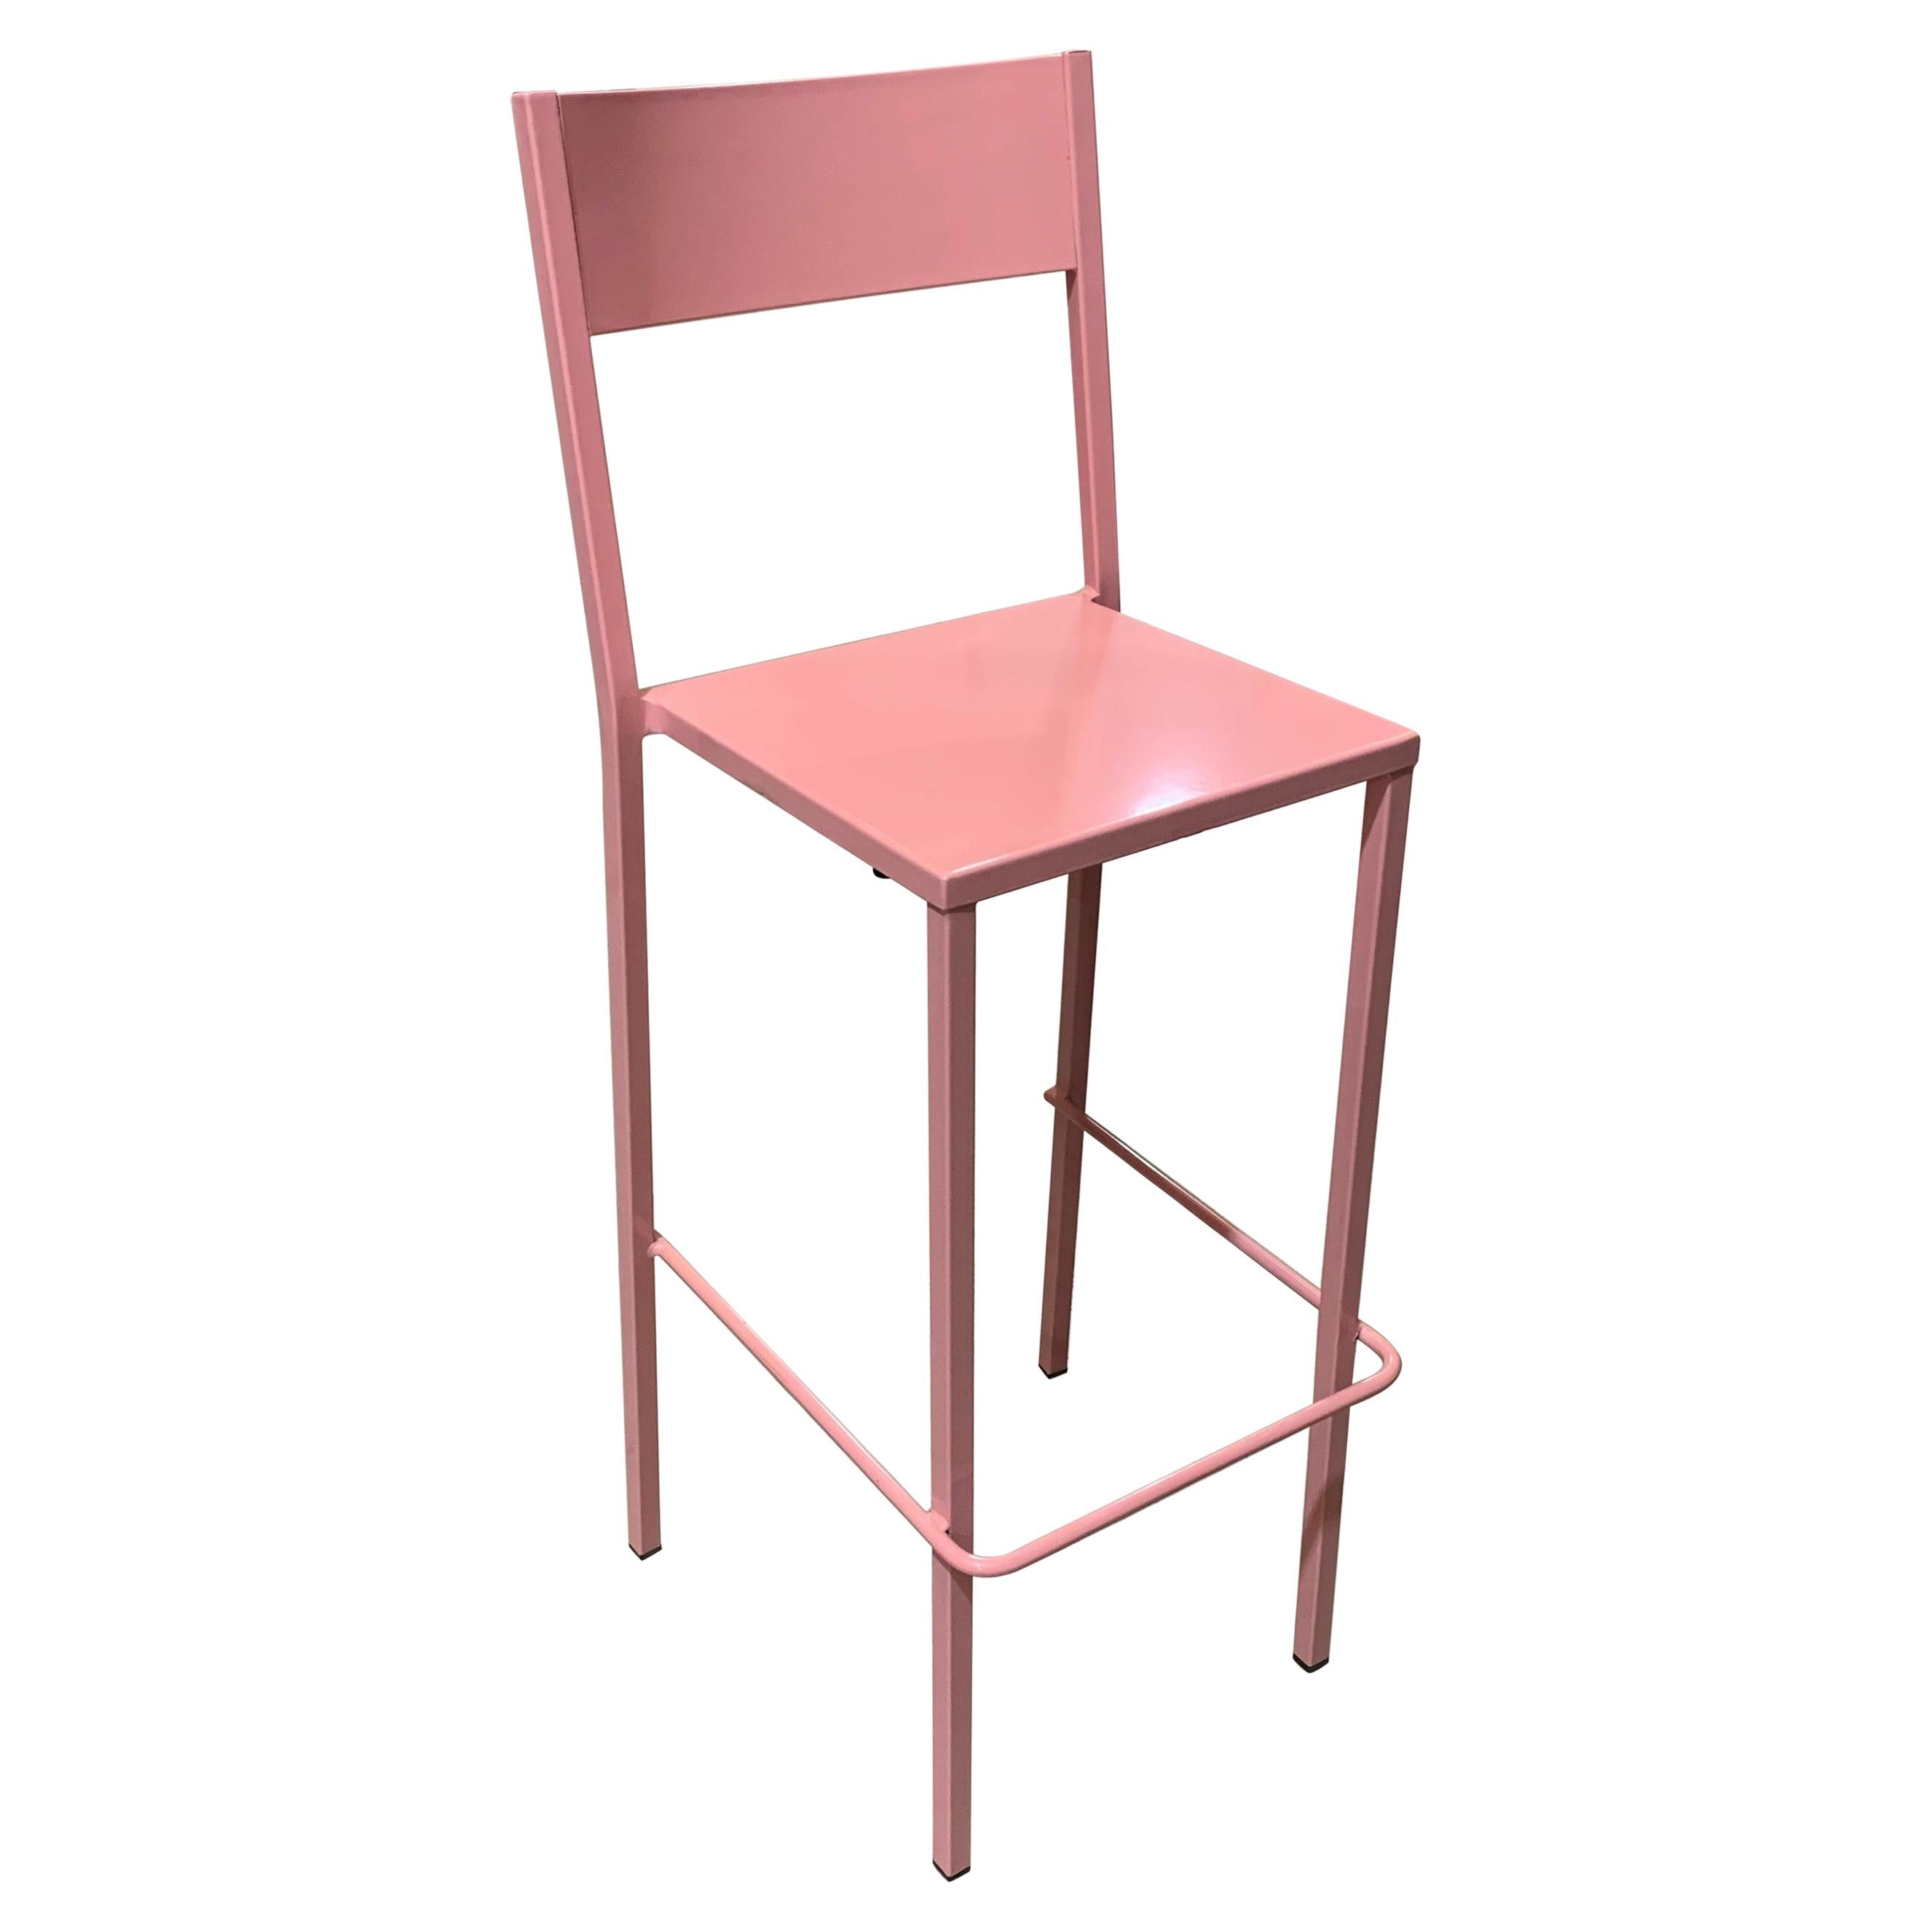 New Pink Industrial Wrought Iron Shop, Counter Stool with Metal Seat and Back For Sale